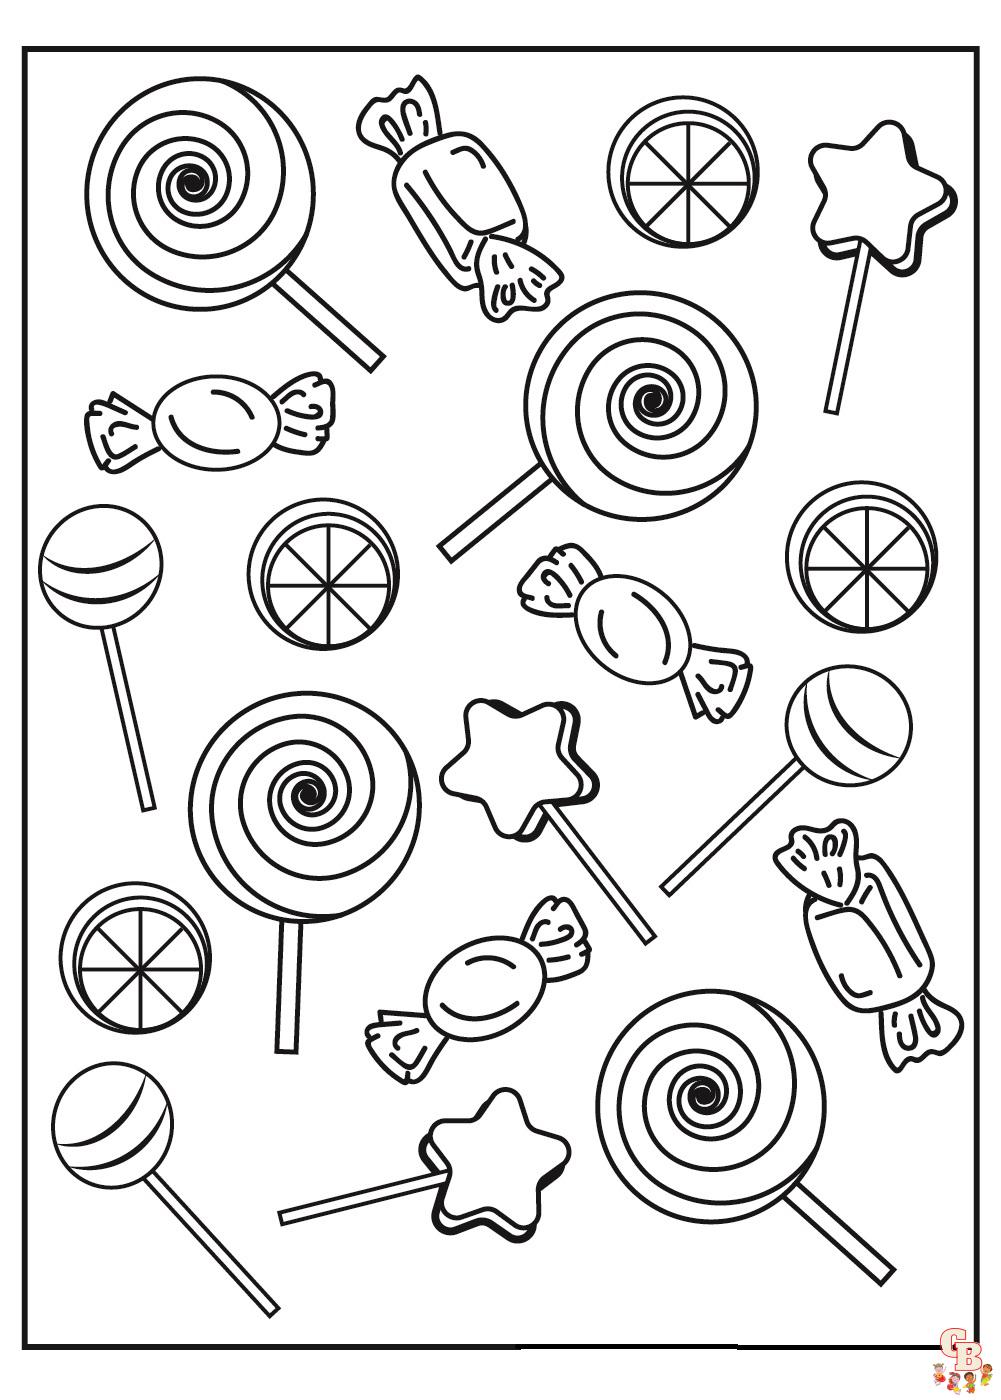 Halloween Candy Coloring Pages 3